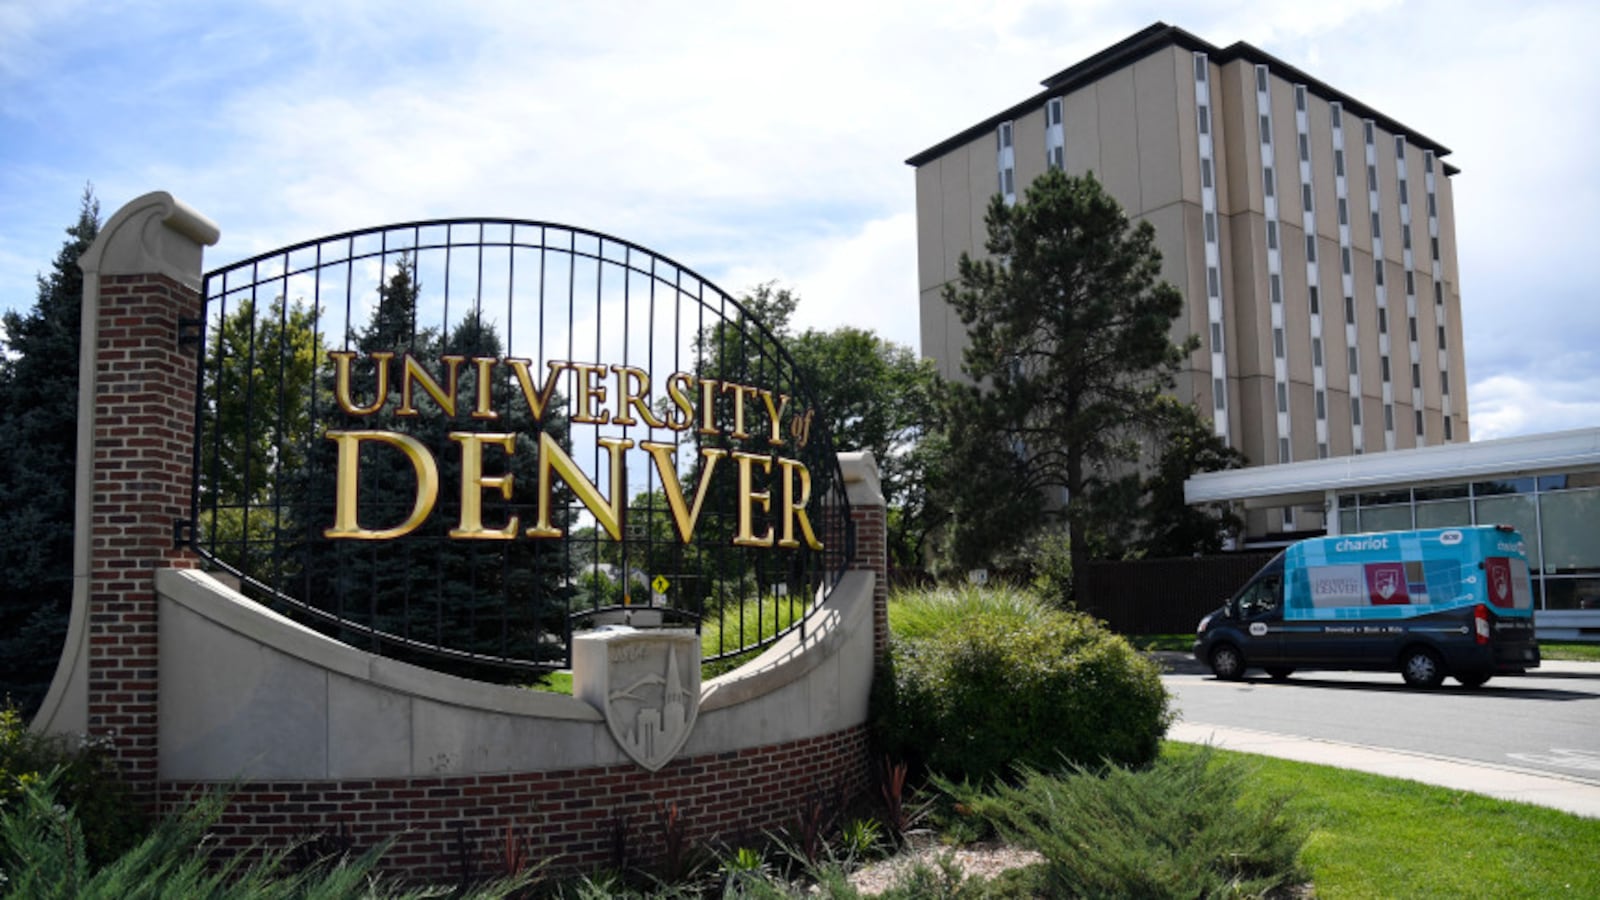 Sign depicts an entrance to the University of Denver campus.